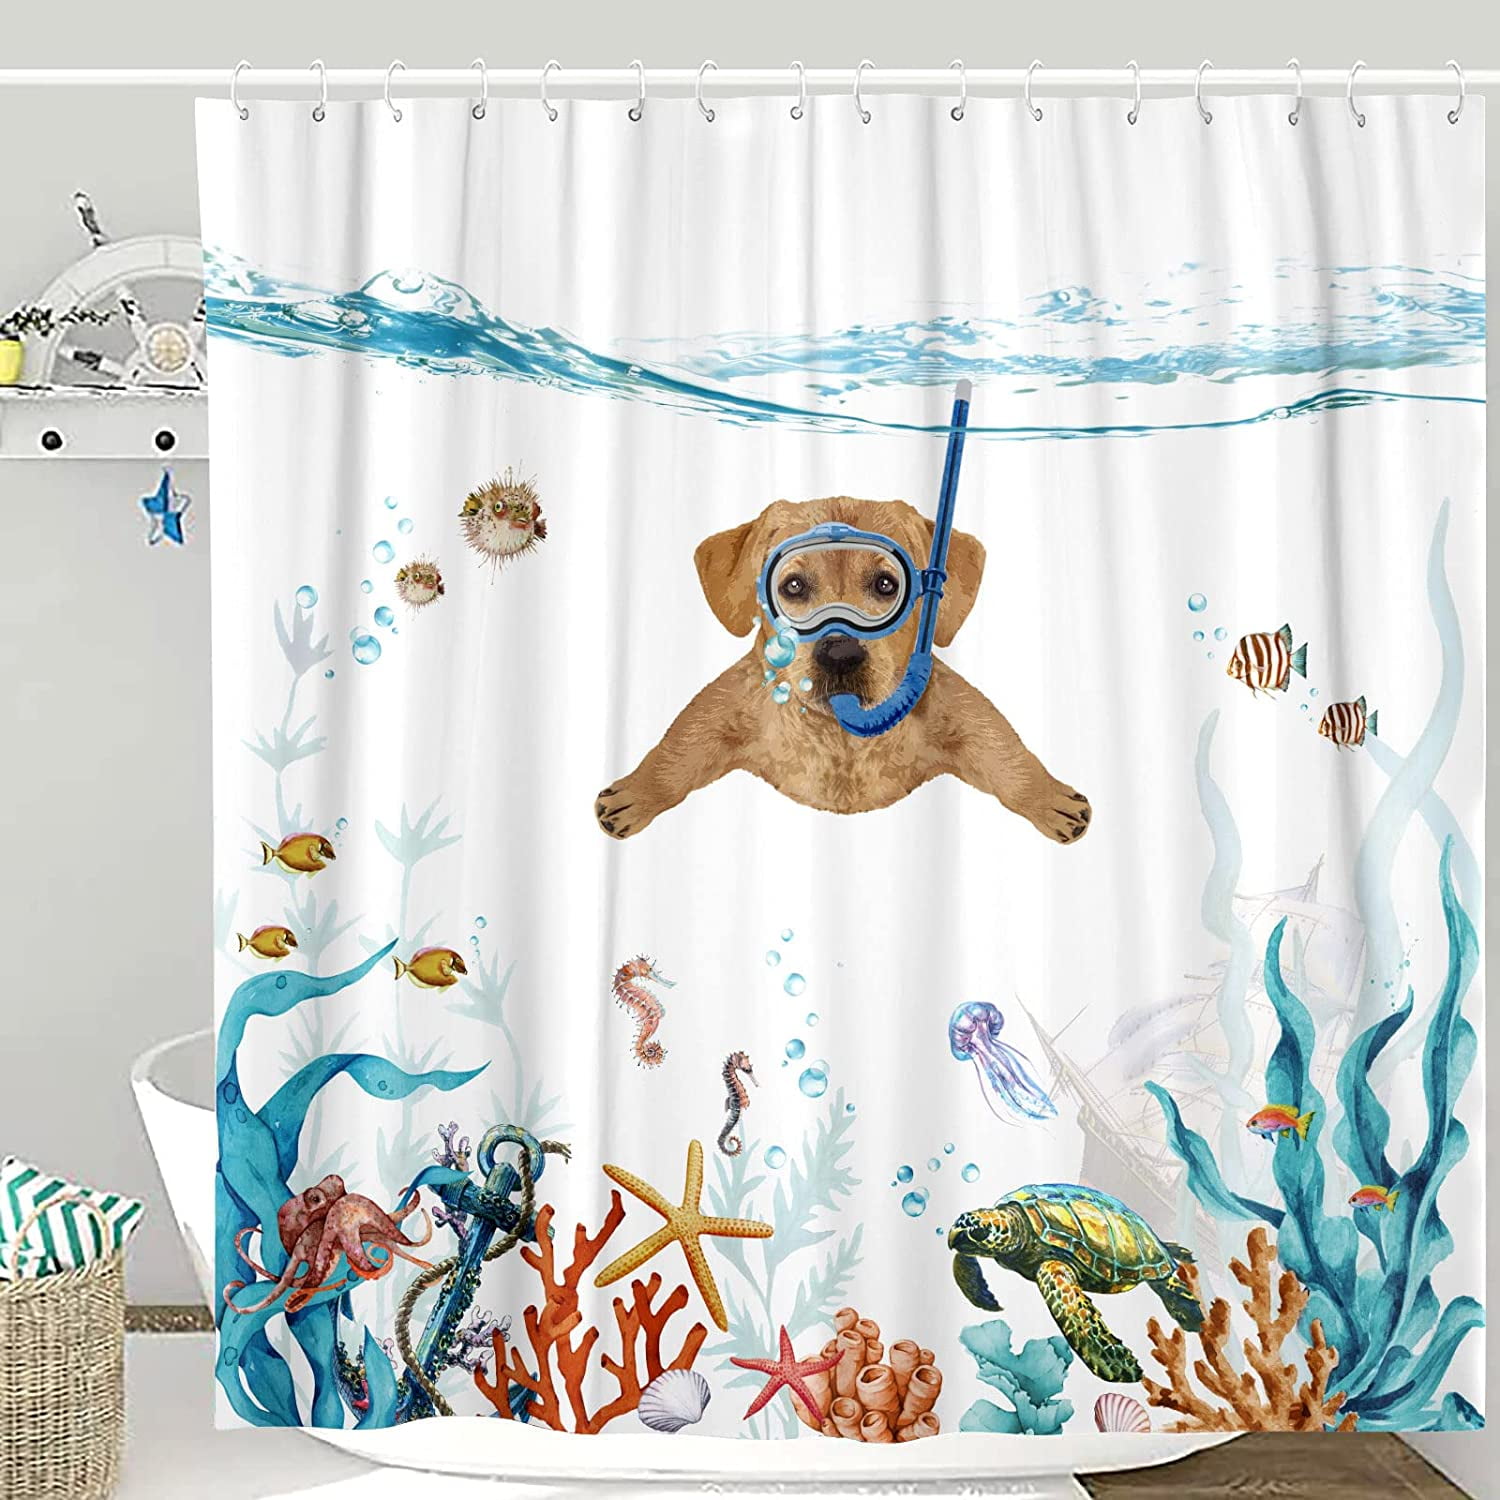  Kuizee Shower Curtain Bathroom Bathtubs Bath Waterproof  ﻿Cartoon Pterodactyl Pteranodon Flying Prehistoric Reptile Curtains Fabric  Decor Easy Install with 12 Hooks,66×72Inch : Home & Kitchen